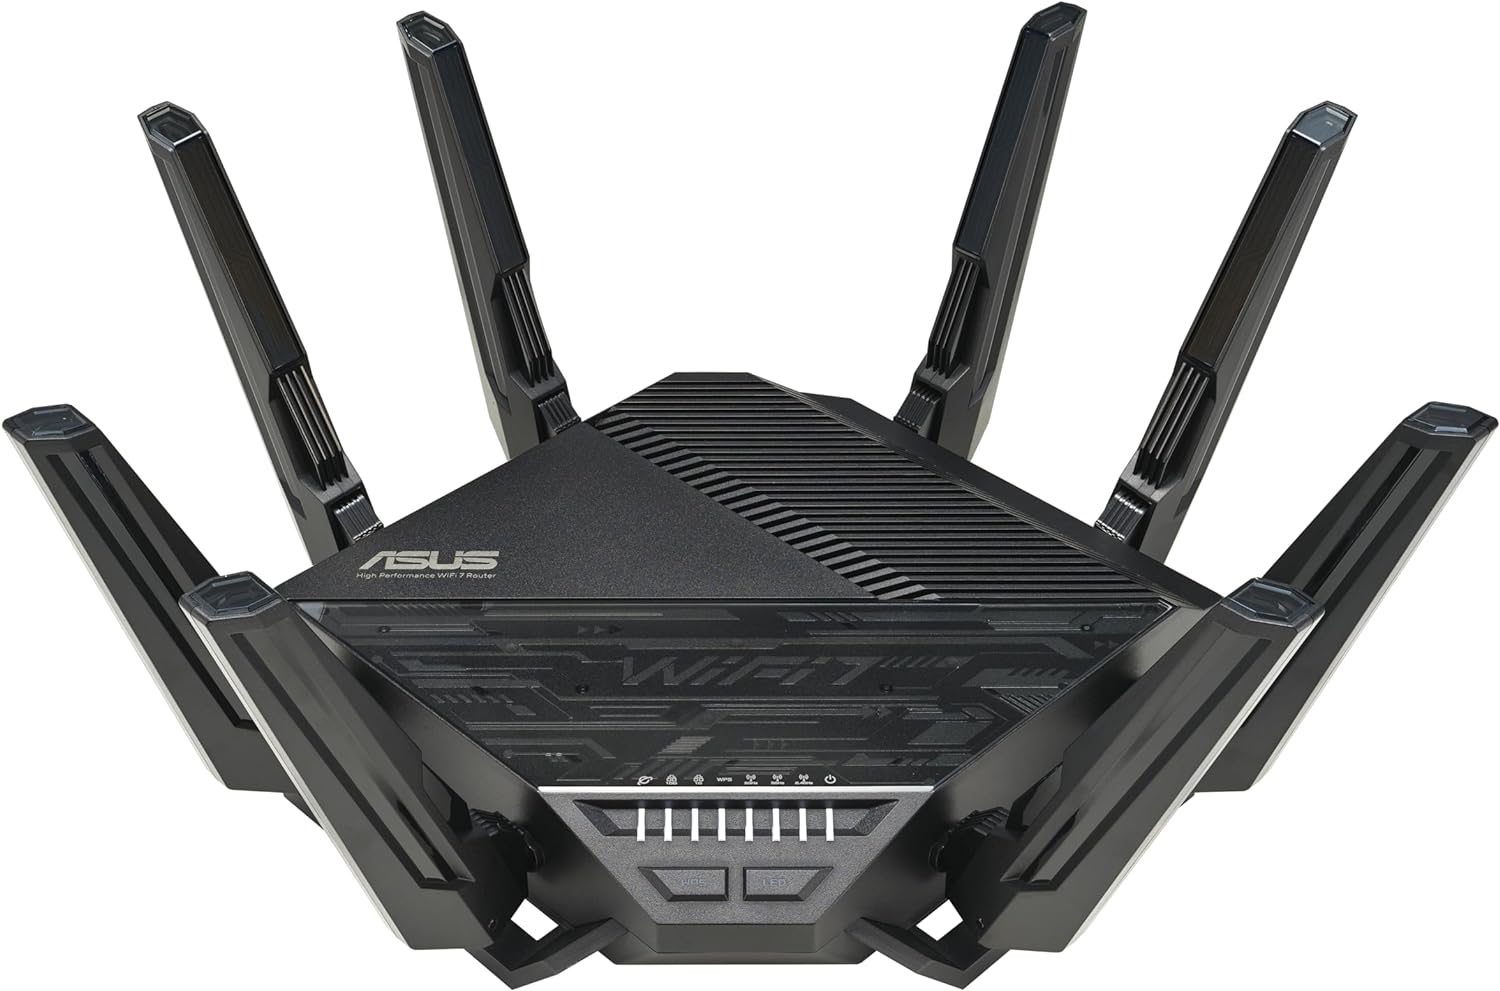 We Reviewed The Best Mesh Wifi 7 Routers Ranked Them Accordingly